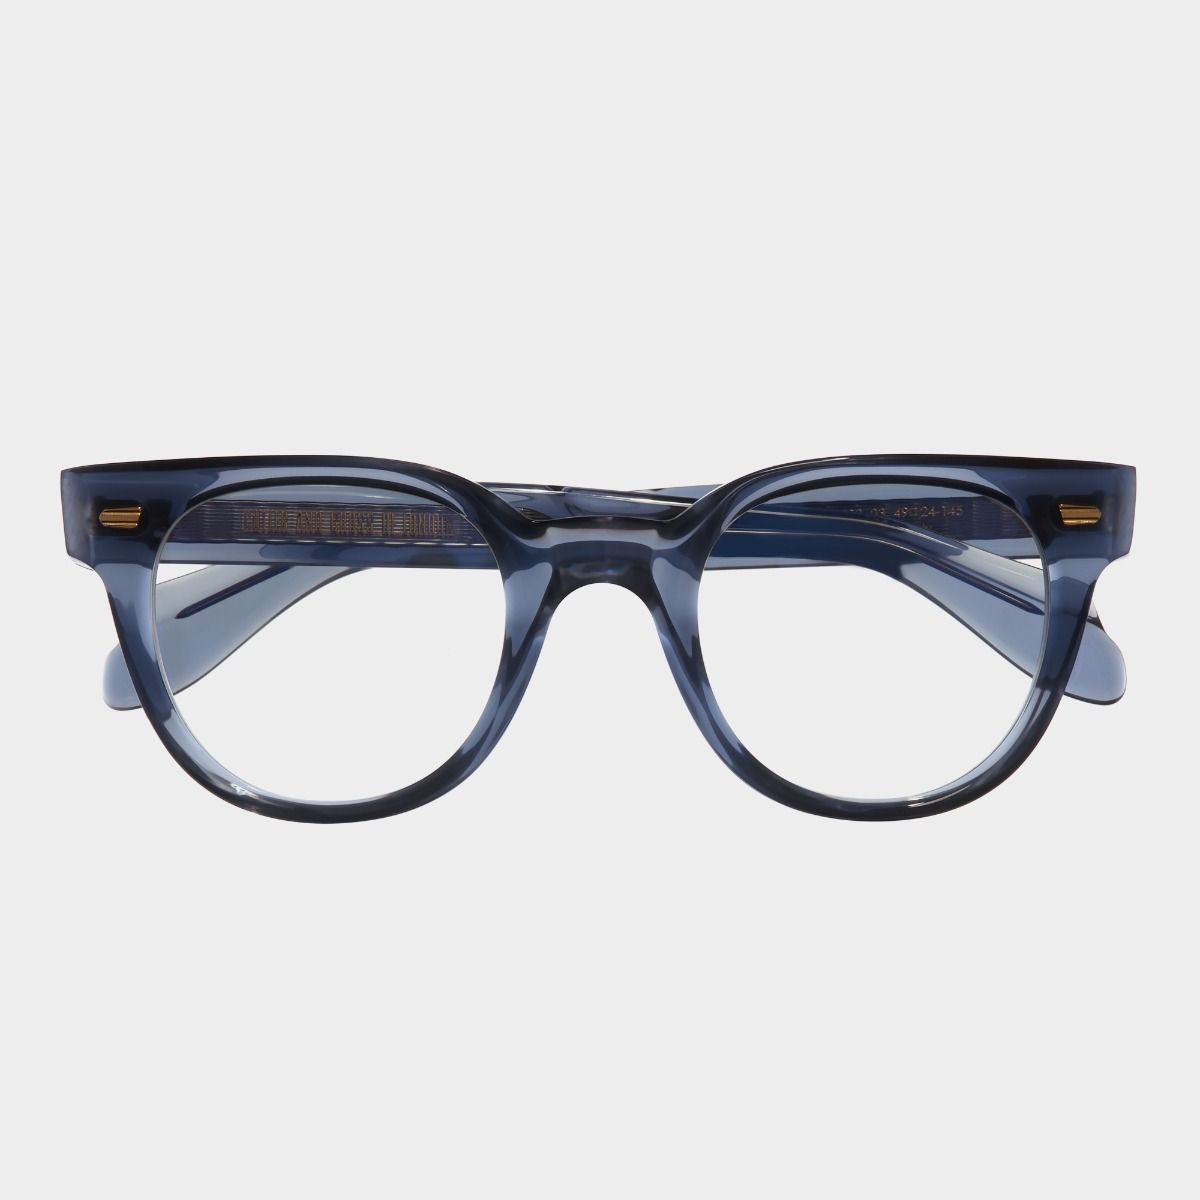 Cutler and Gross, 1392 Optical Round Glasses - Brooklyn Blue